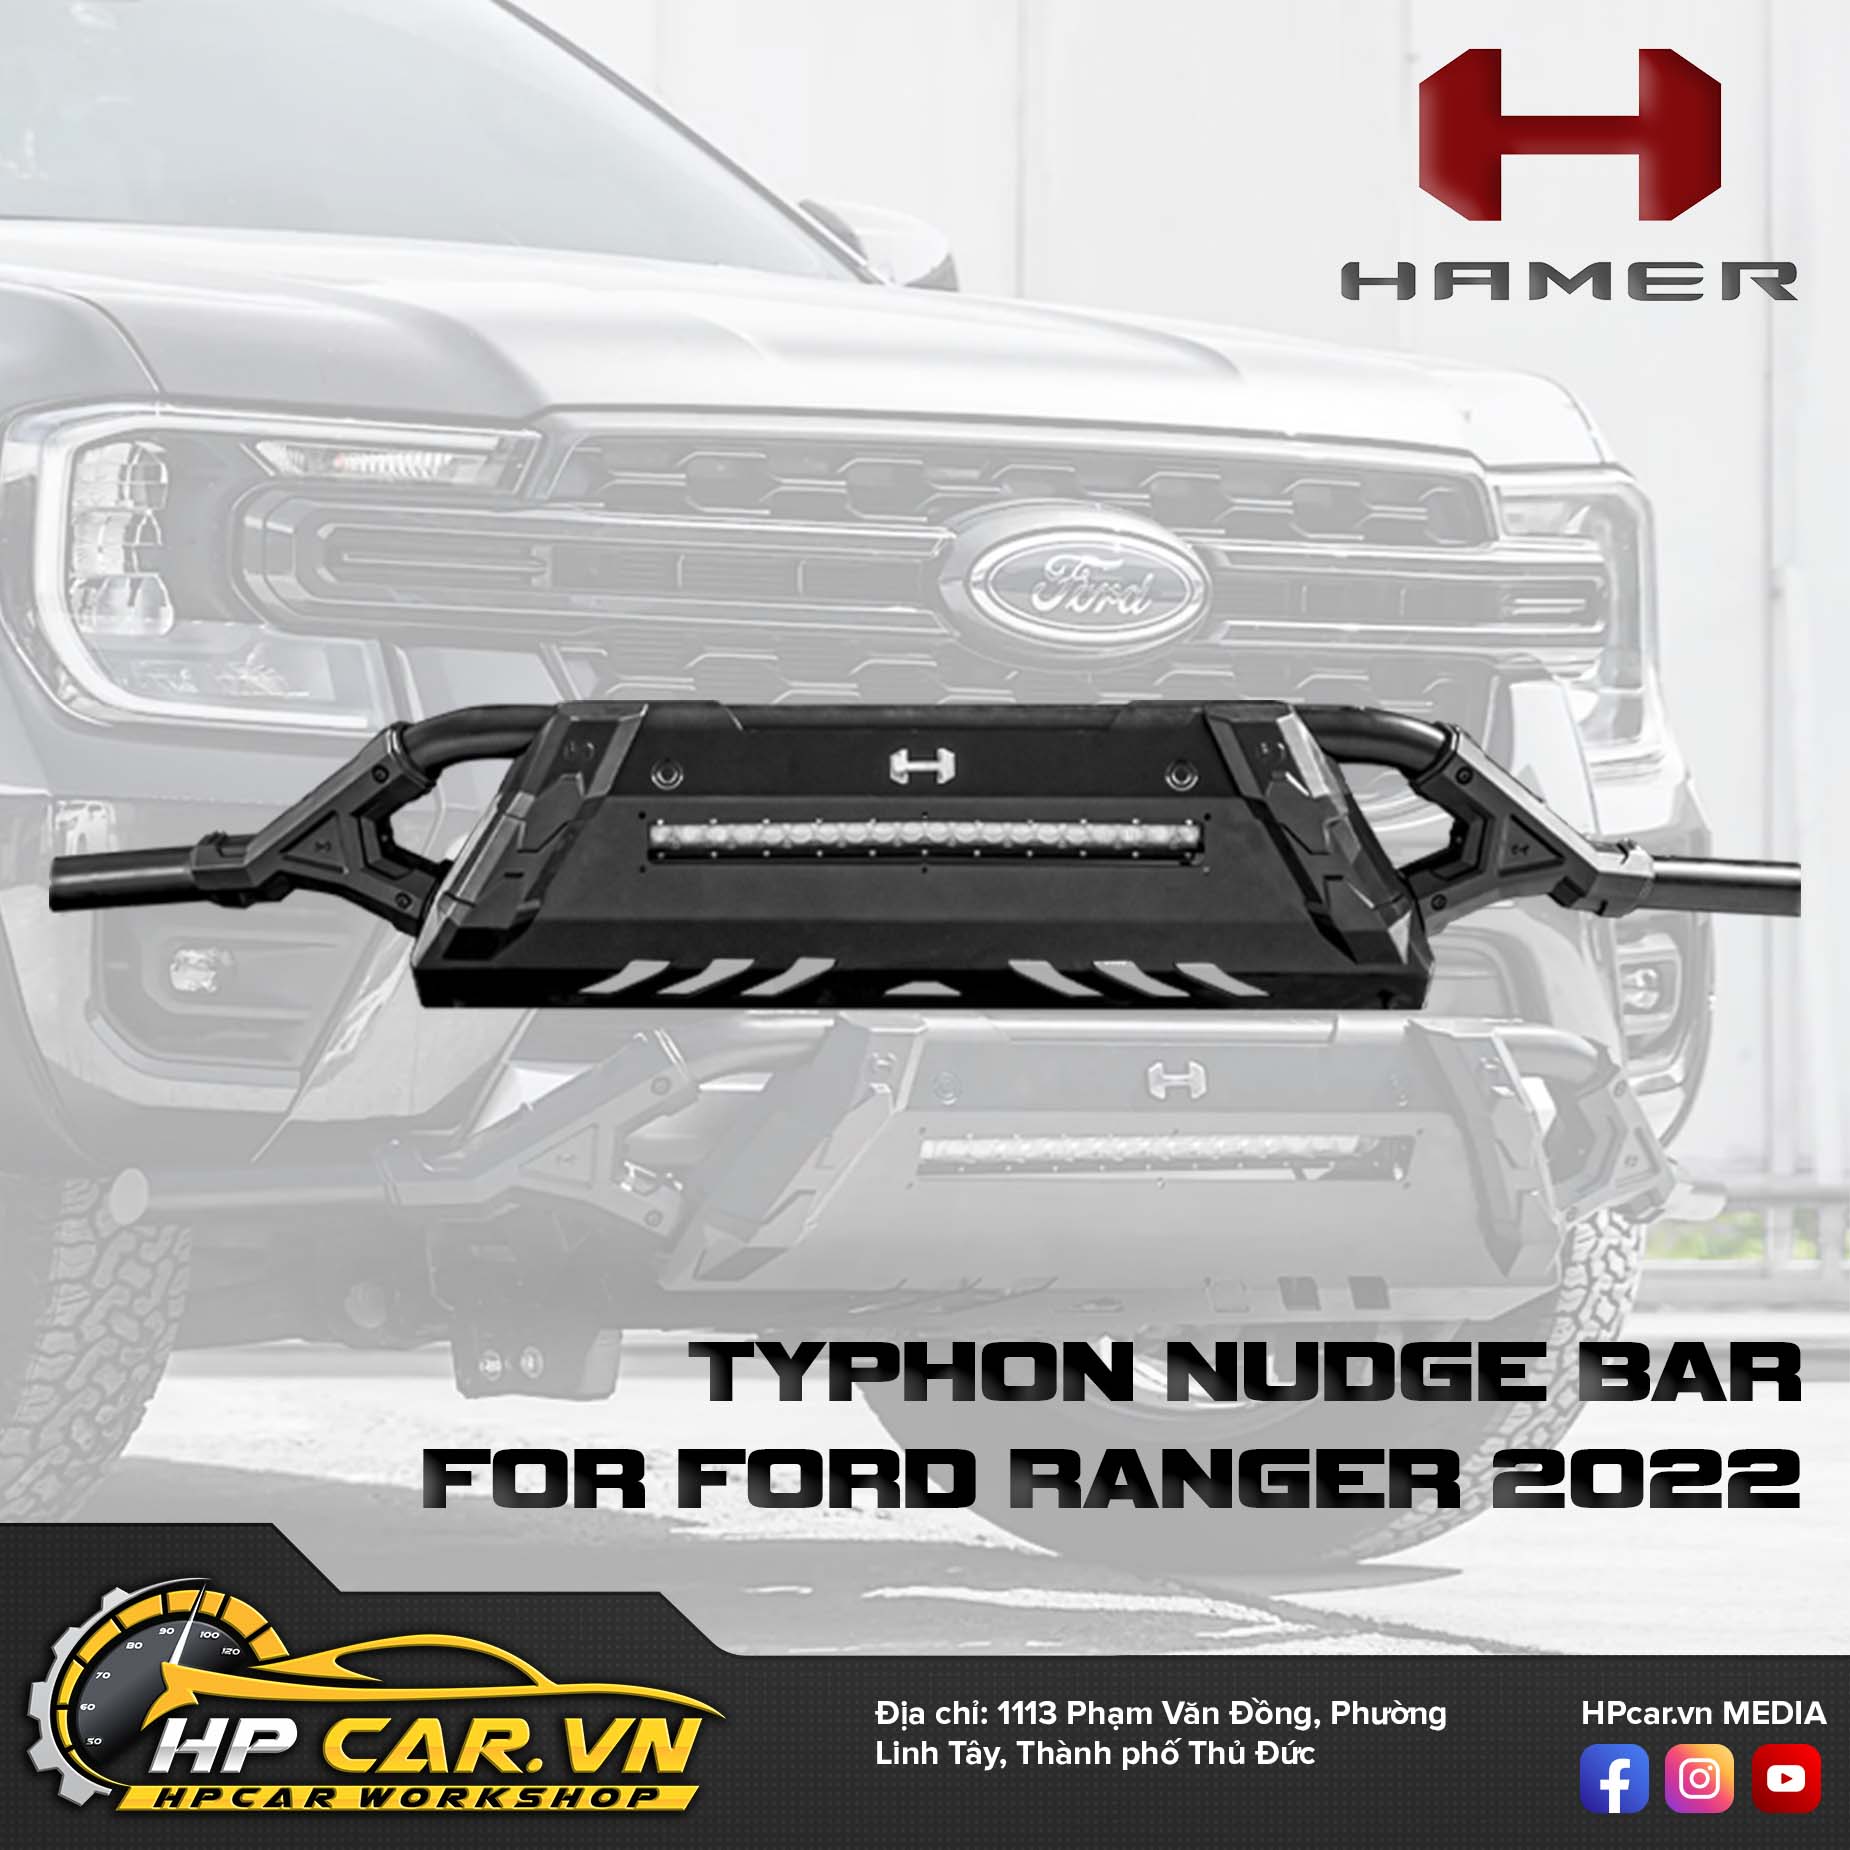 TYPHON NUDGE BAR FOR FORD RANGER 2022